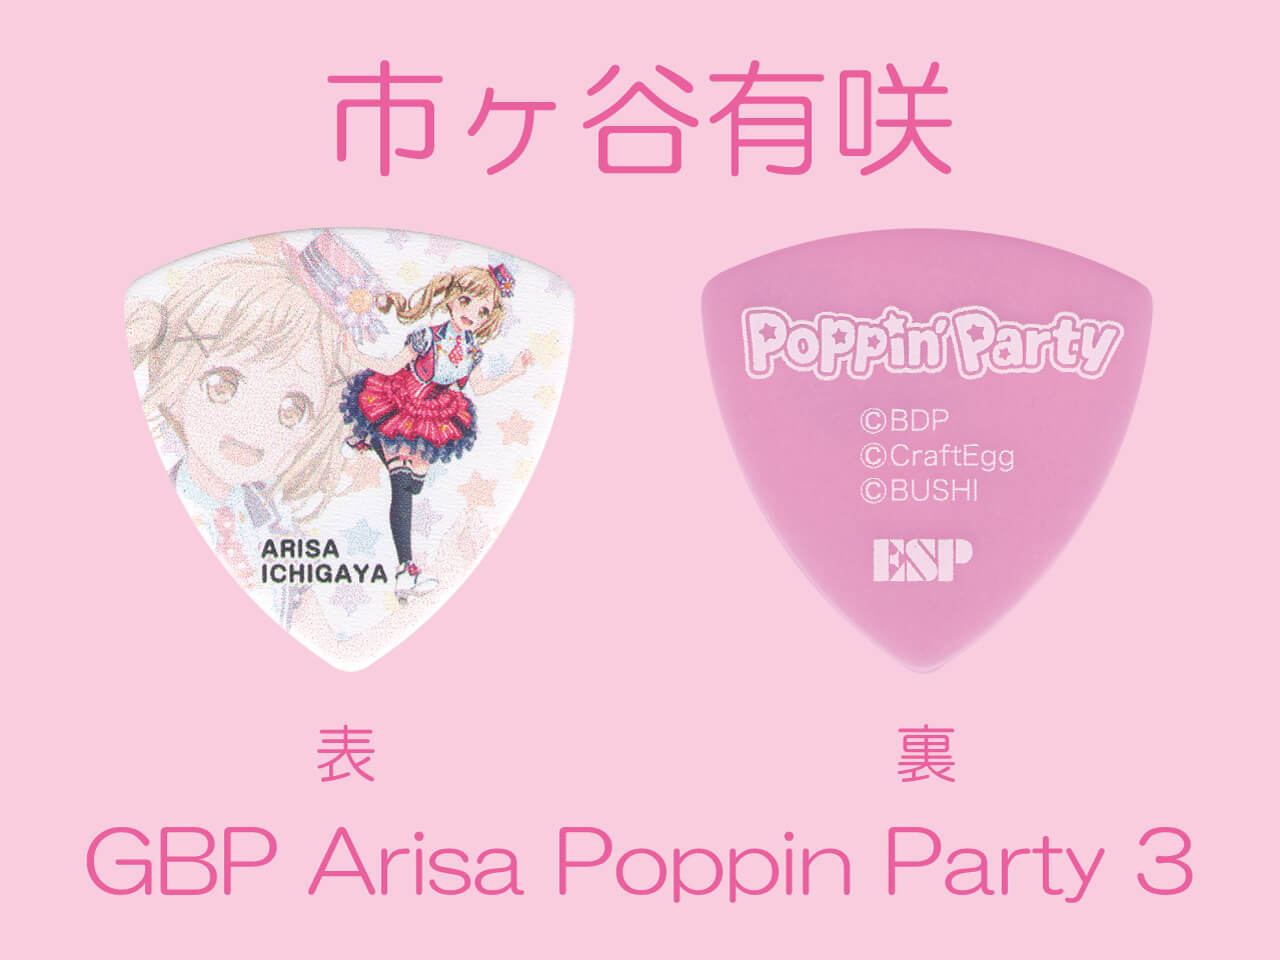 【ESP×BanG Dream!コラボピック】Poppin’Party Character Pick Ver.3 "市ヶ谷有咲"（GBP Arisa Poppin Party 3）＆”ハメパチ” セット